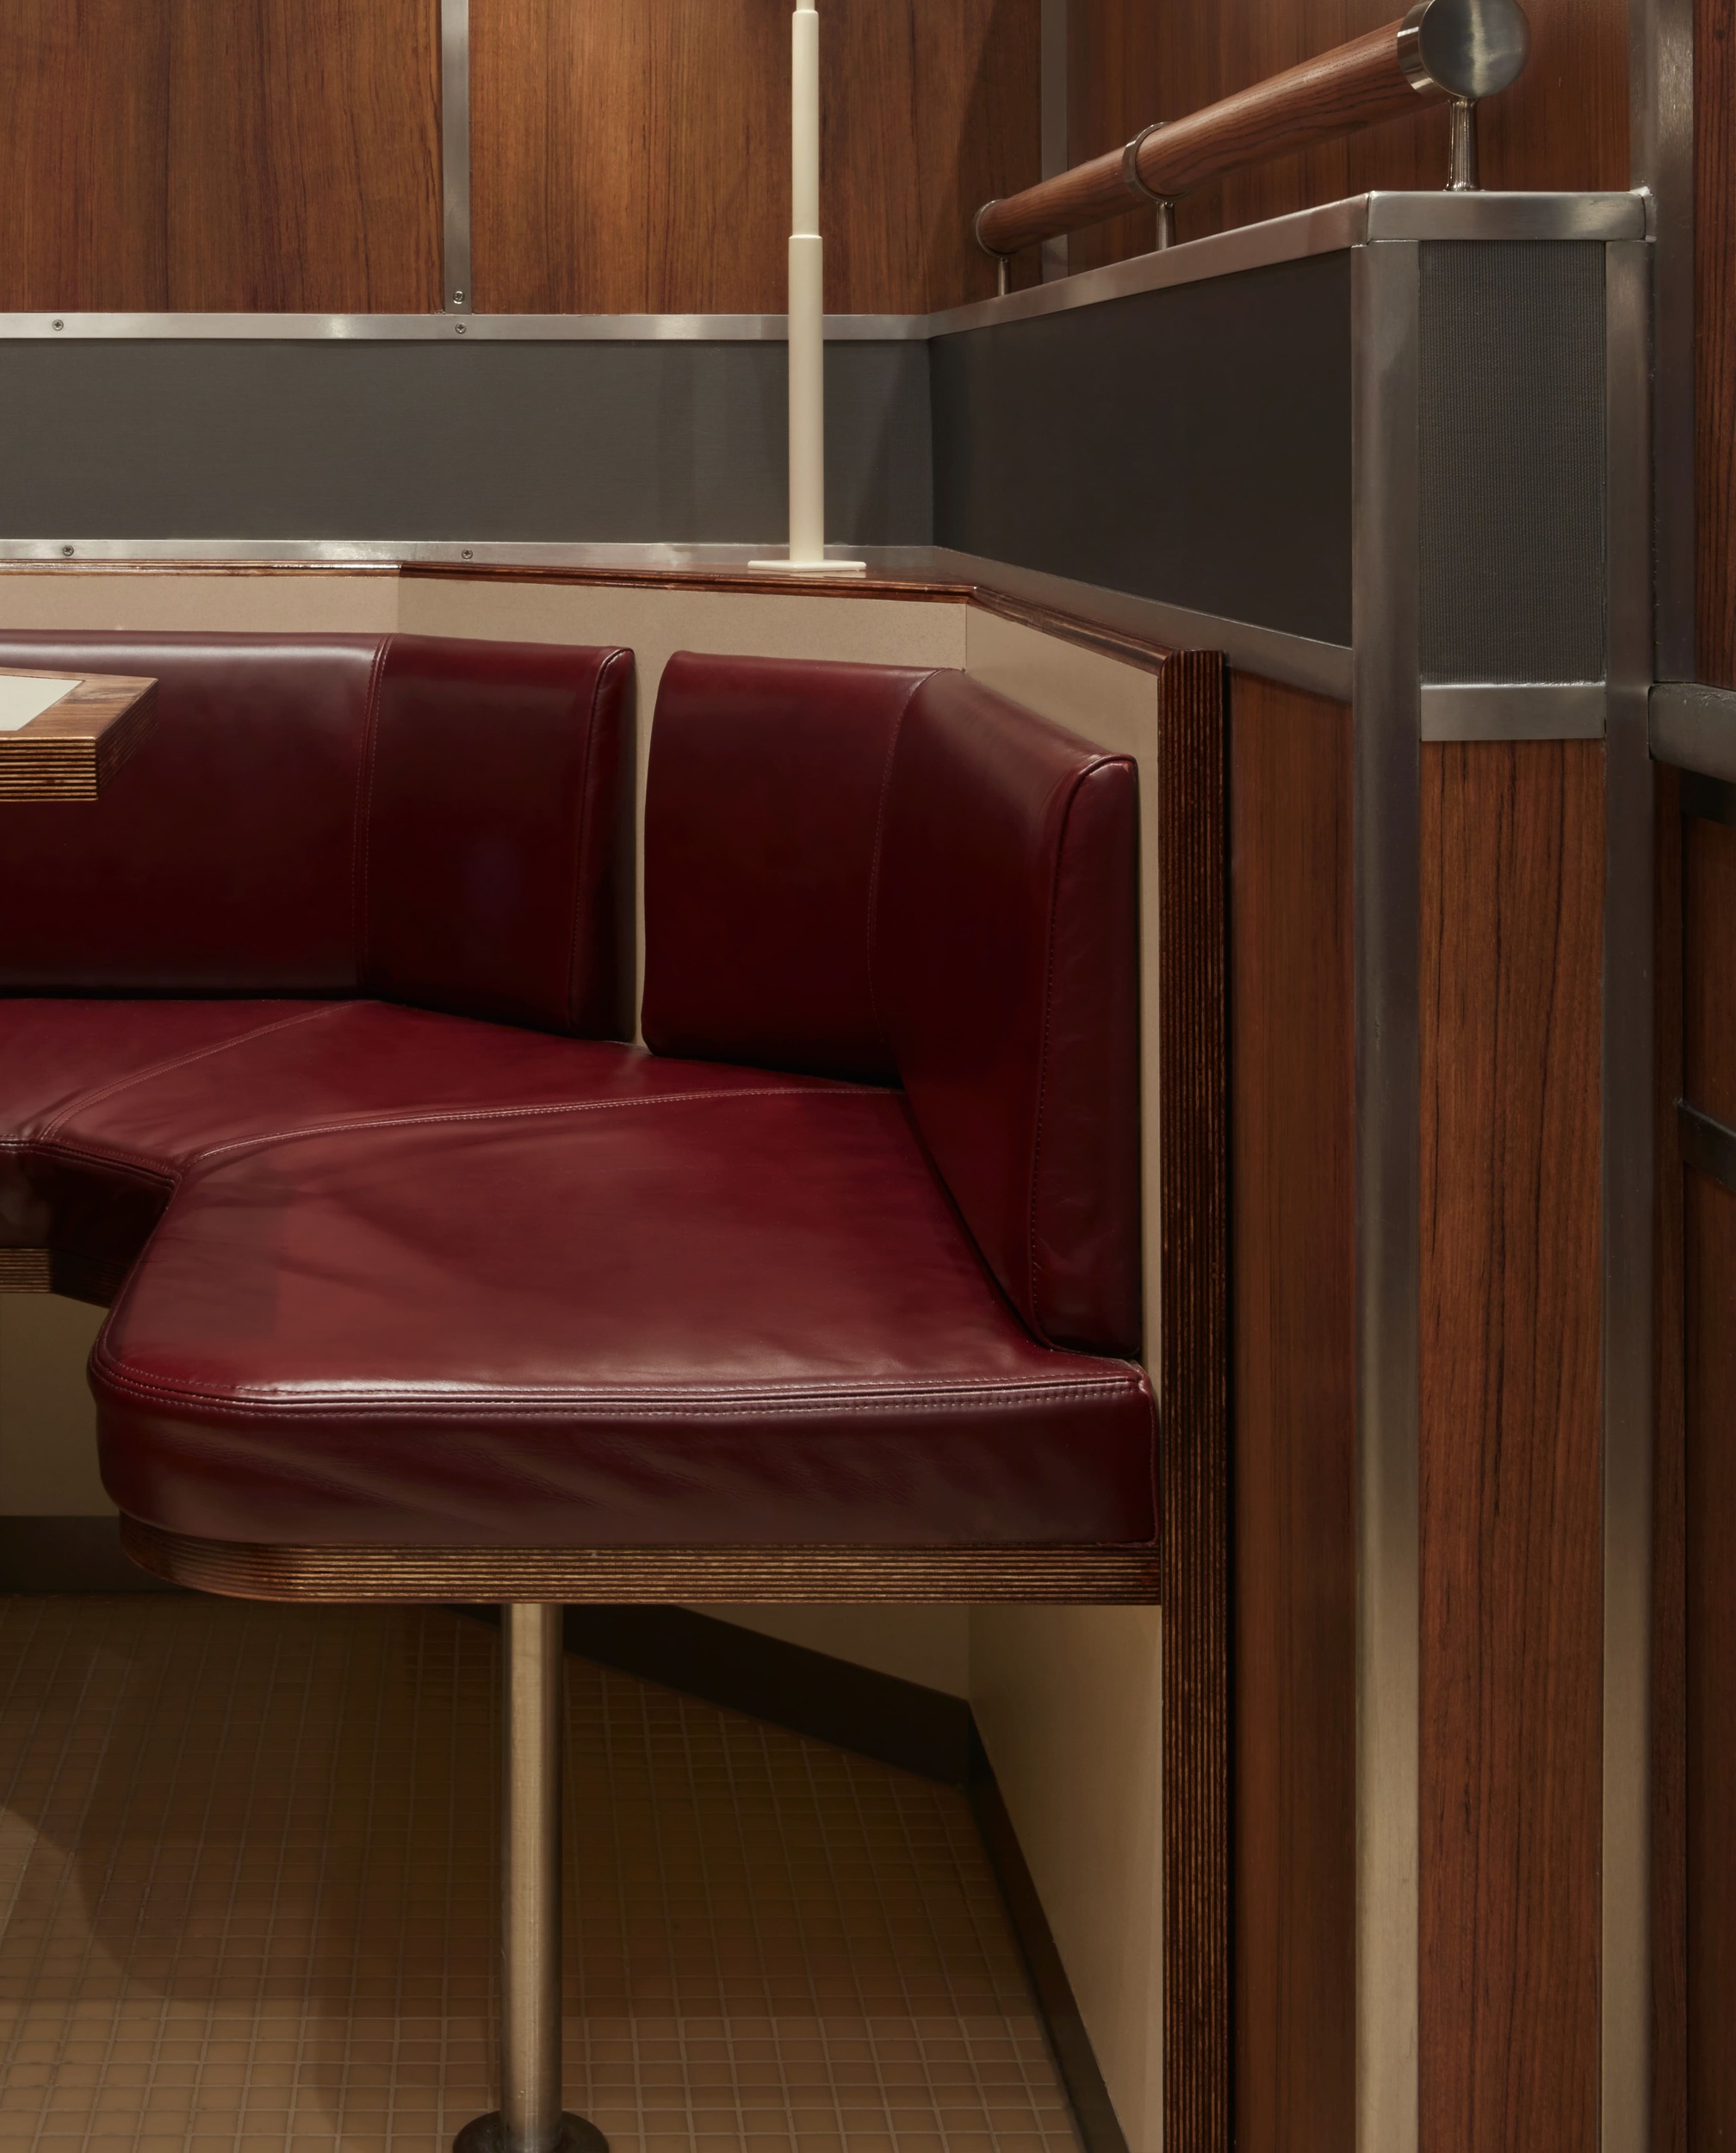 Close-up view of red leather café banquette